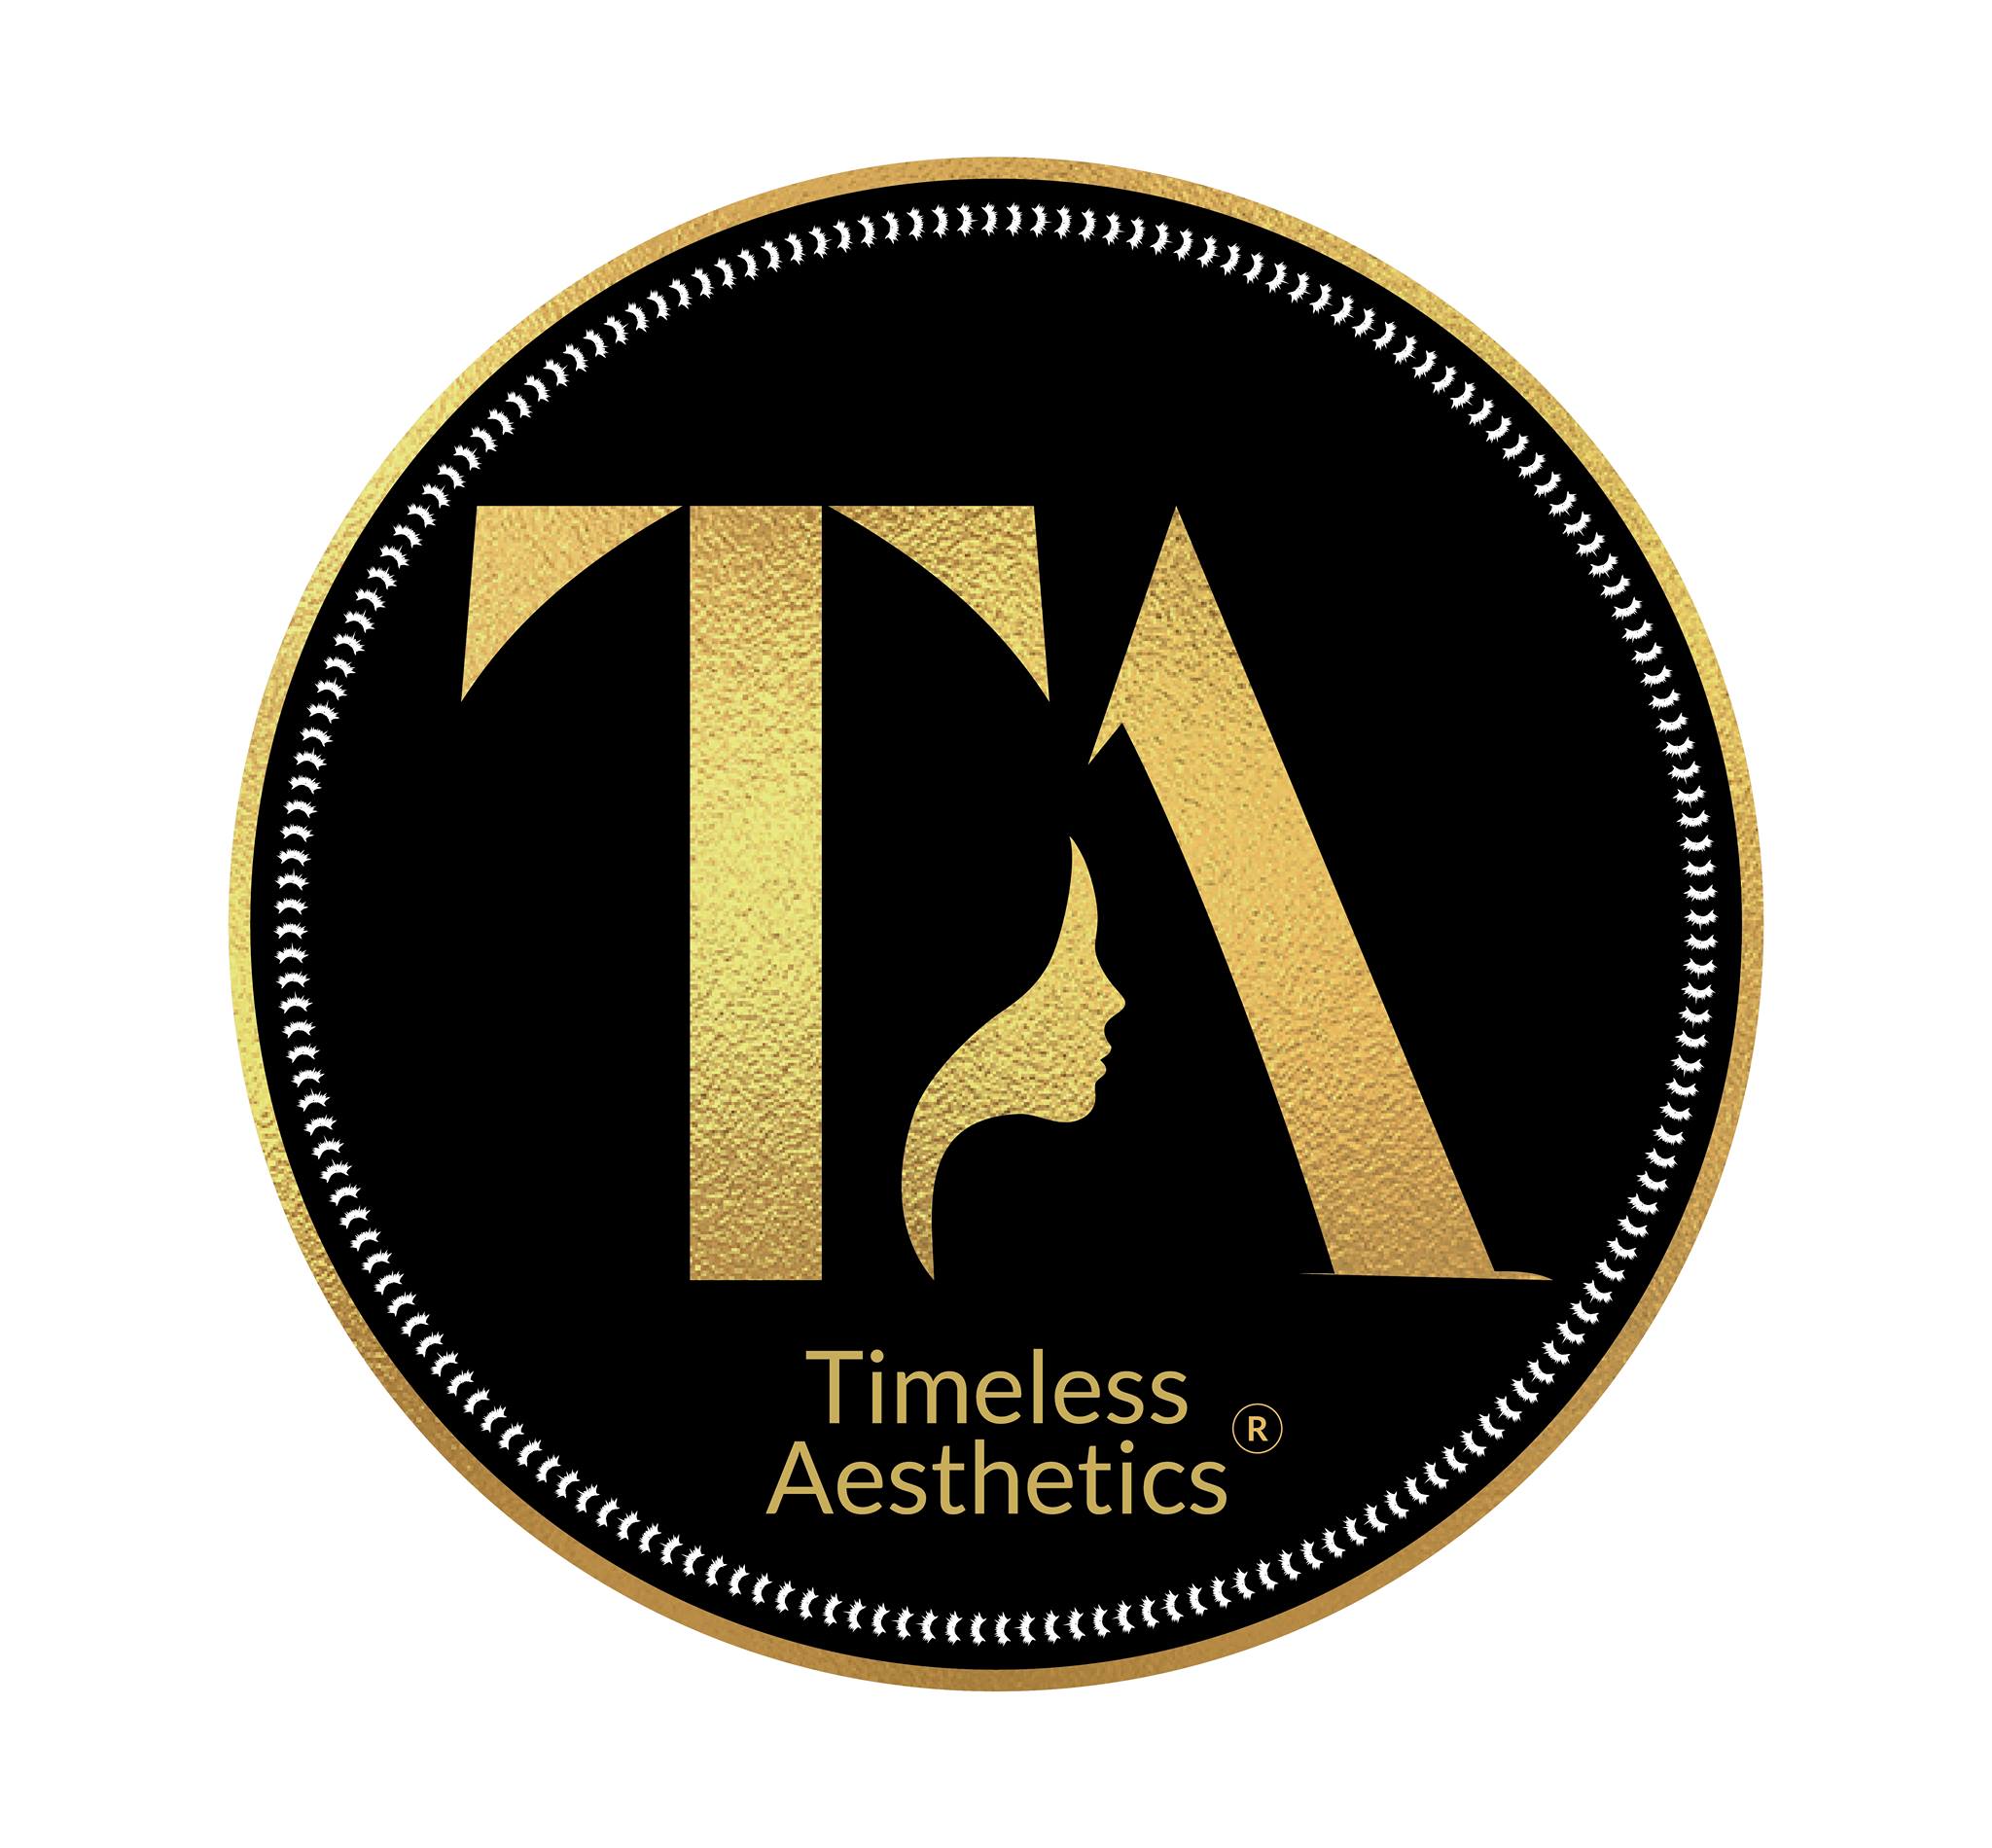 Timeless Aesthetics|Accounting Services|Professional Services